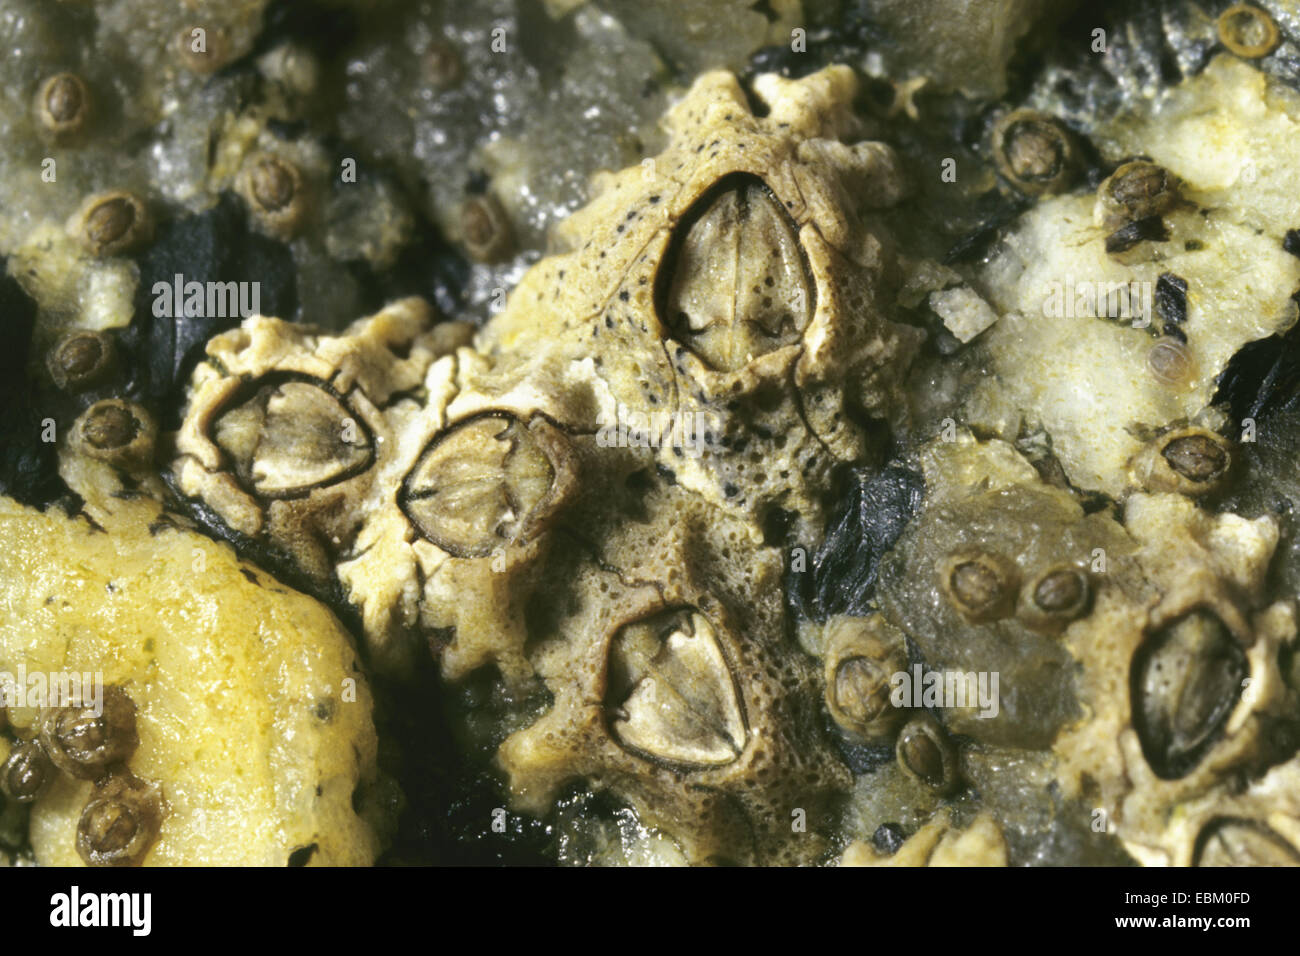 Montagu stellate del barnacle (Chthamalus montagui), close up Foto Stock